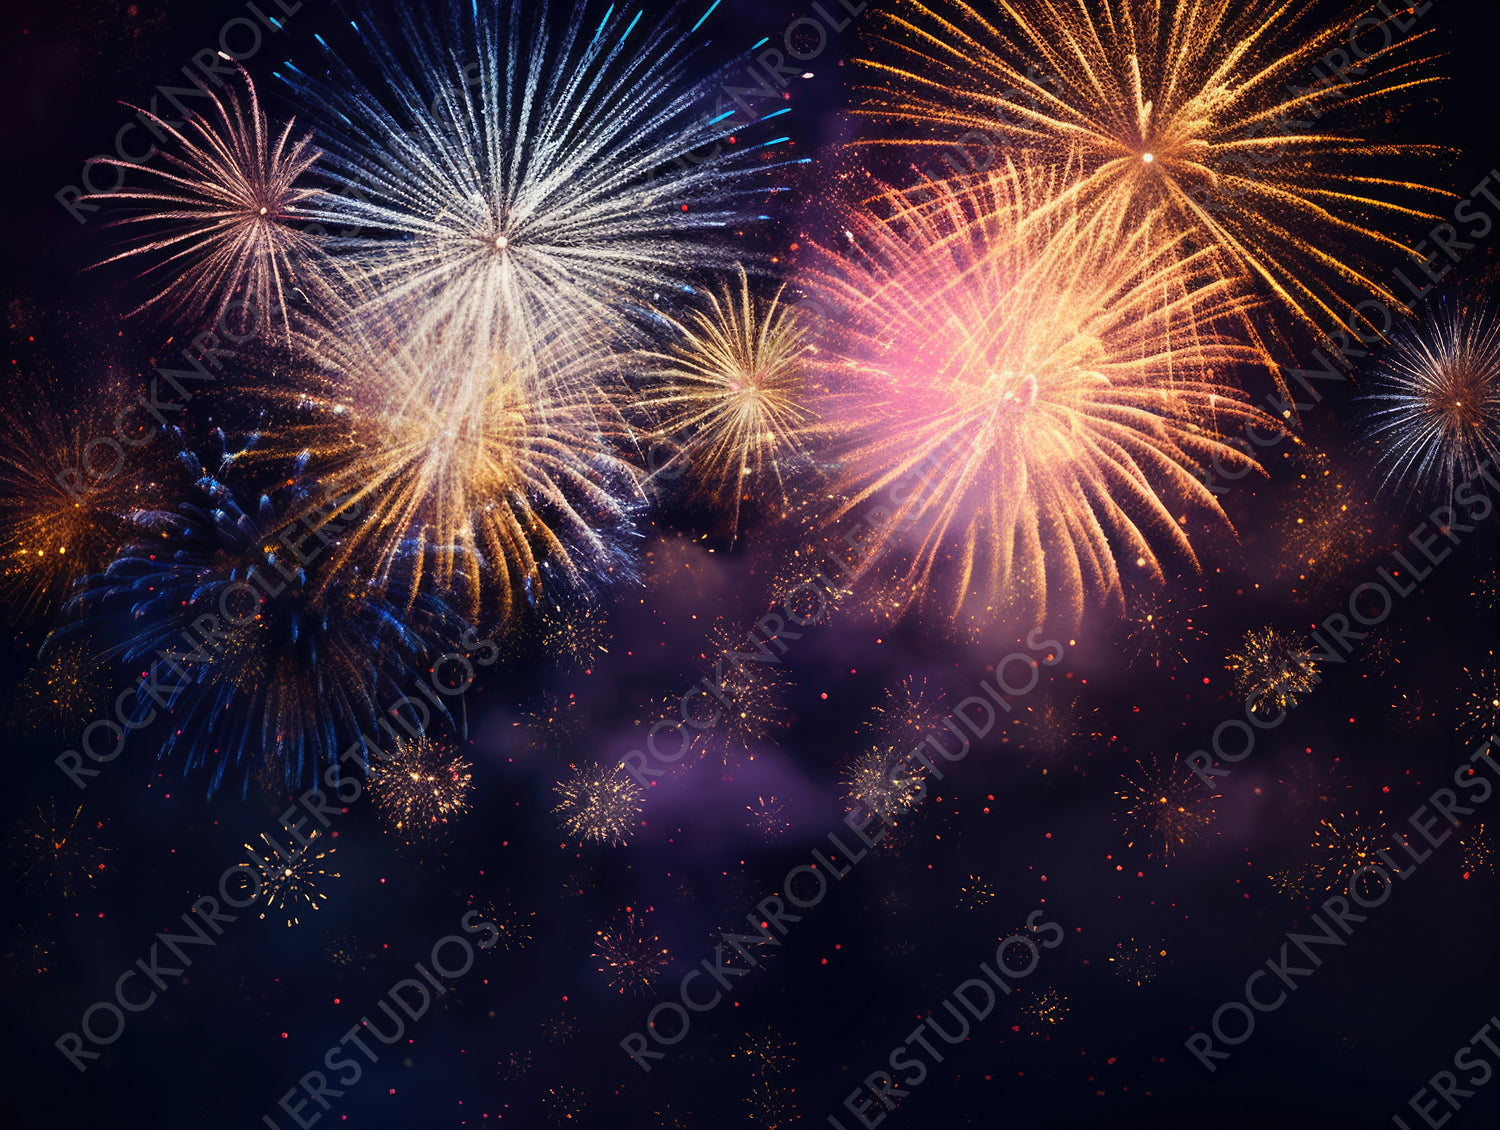 Happy New Year Celebration with Festive Gold Fireworks in Night Sky